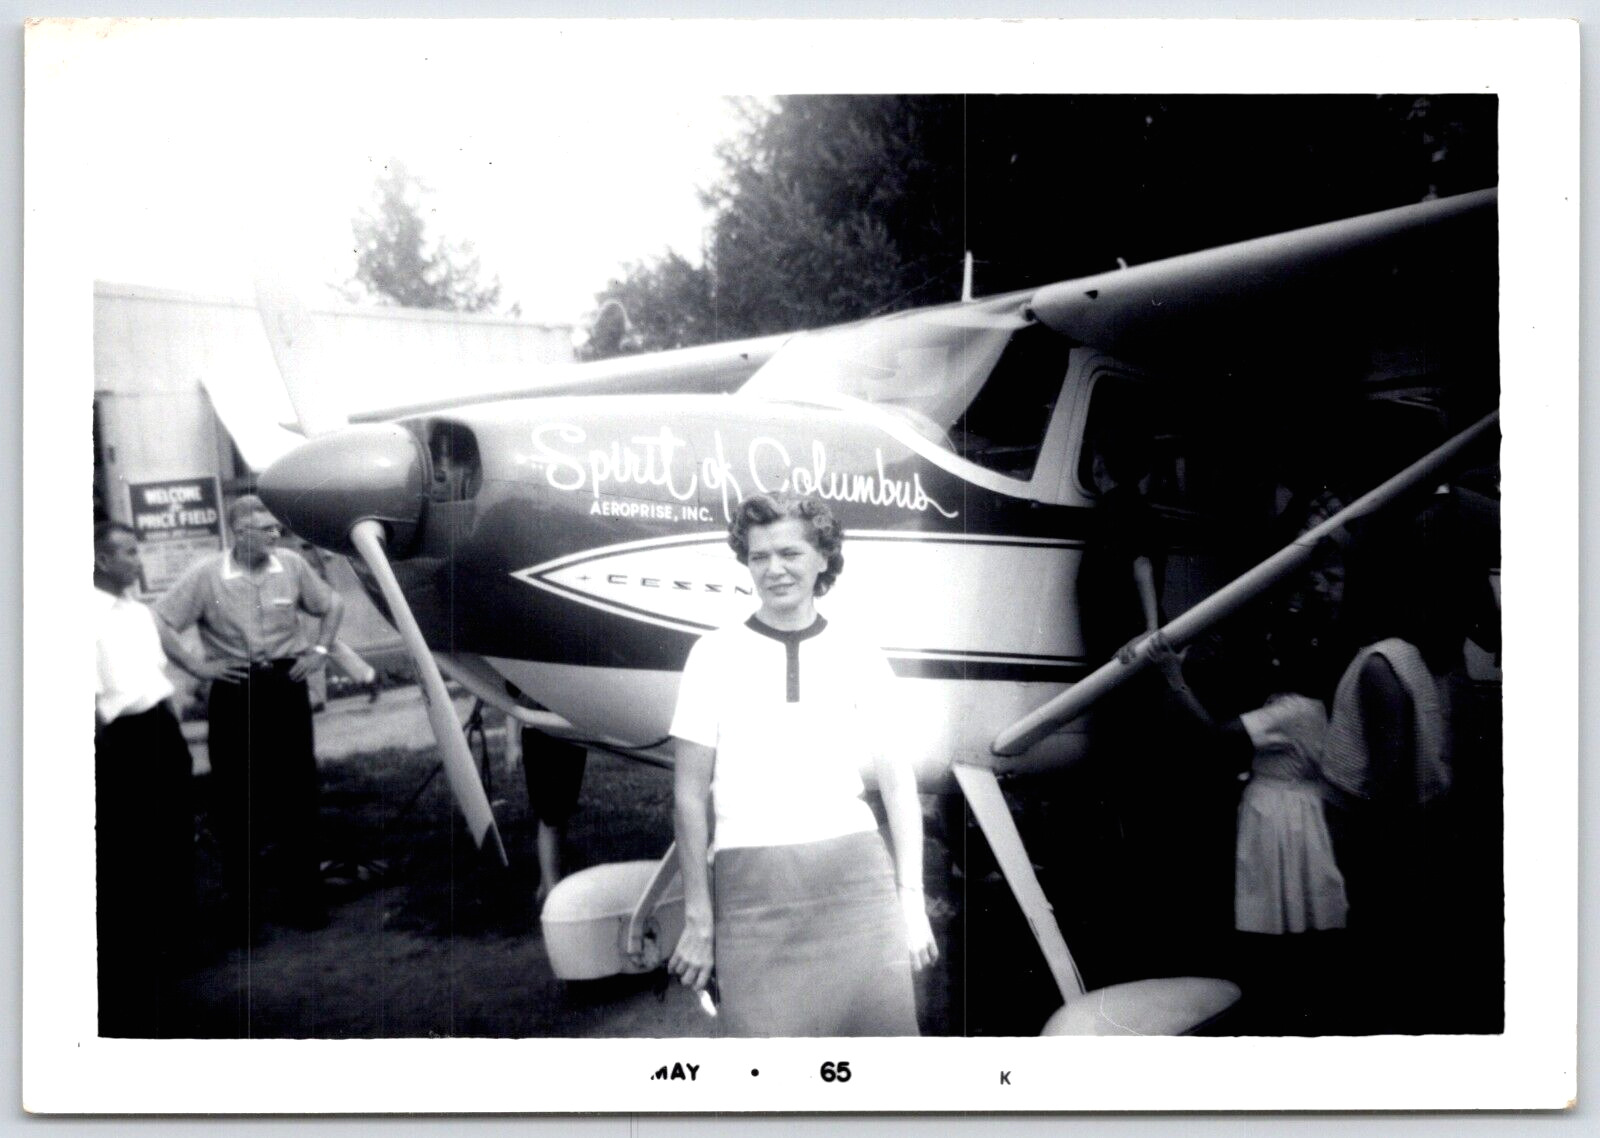 Photo Woman standing in front of Spirit of Columbus plane May 65 Cessna 180